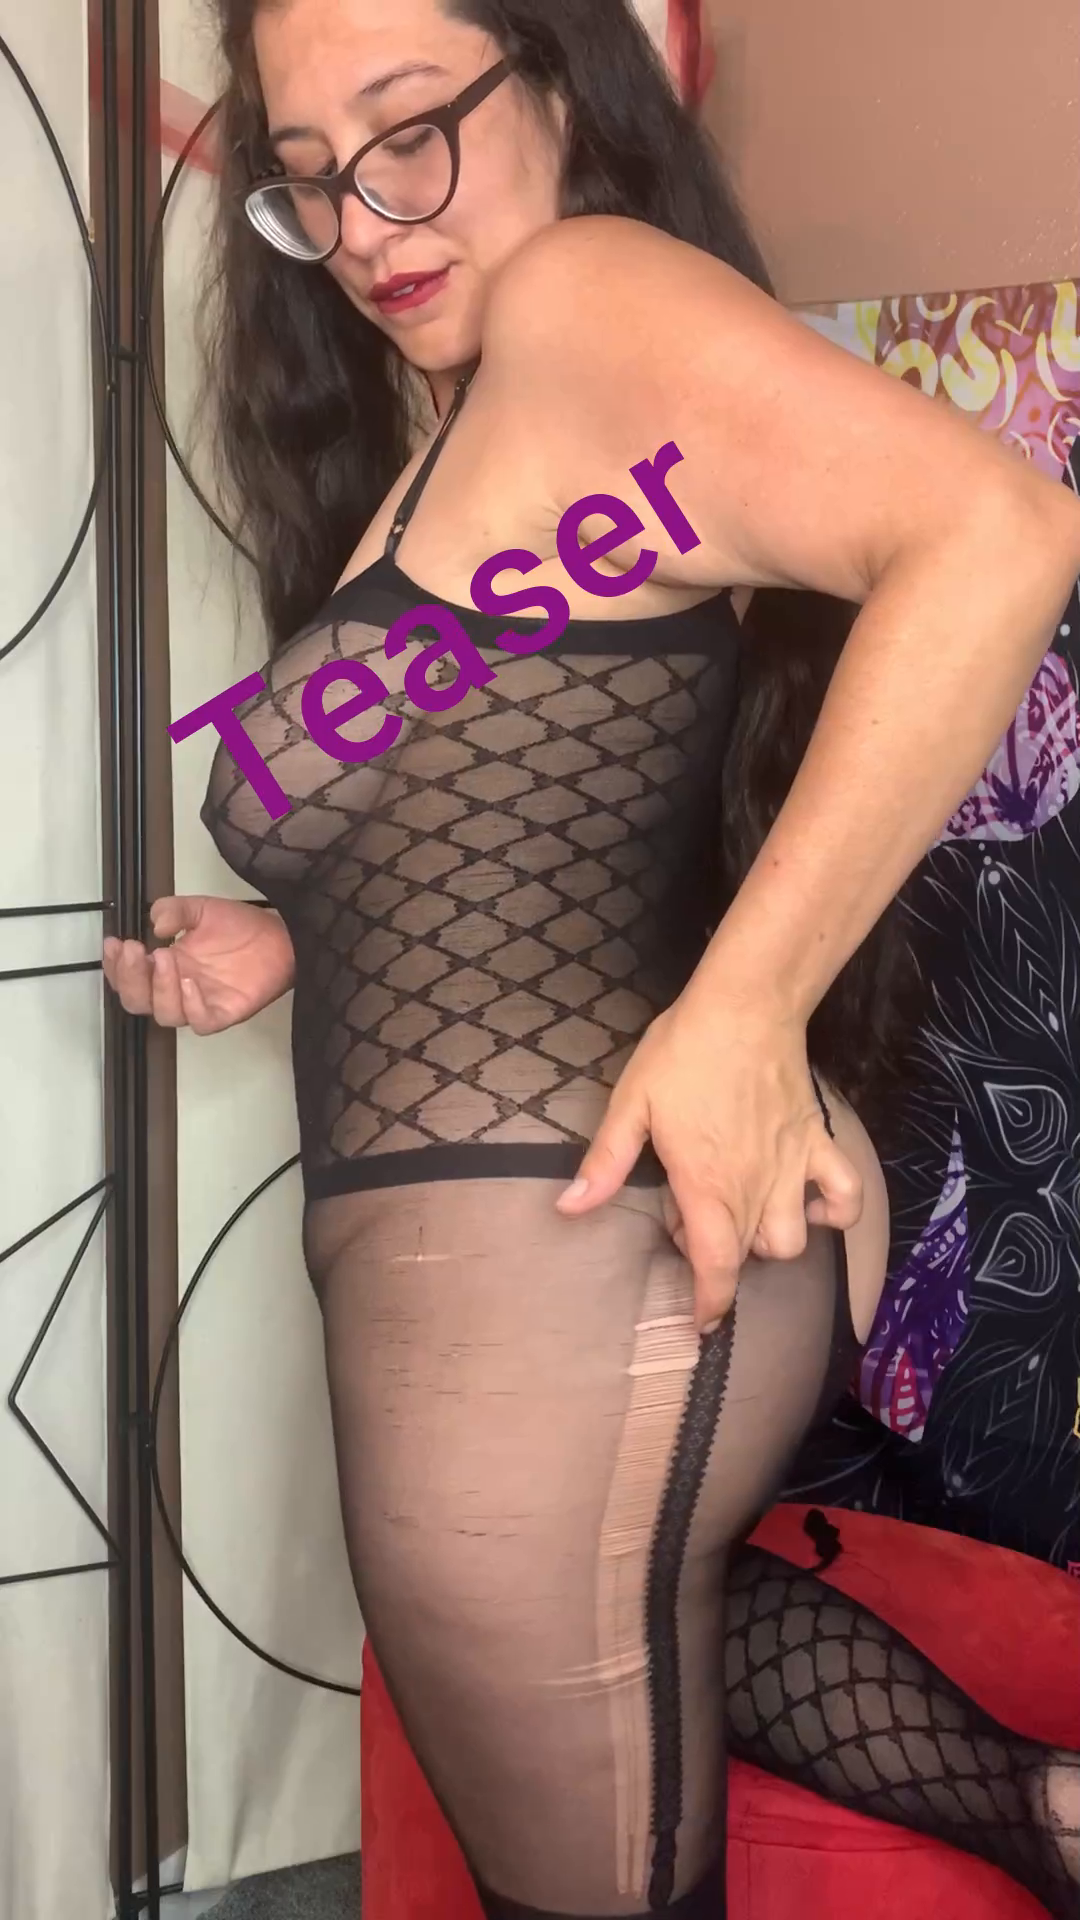 Video by Raven_Enchantress with the username @curvyraven, who is a star user,  July 25, 2020 at 10:25 PM. The post is about the topic Stockings and the text says 'https://www.manyvids.com/Video/2103440/ripping-fishnets-and-cum-denial/

The sounds of the rips will make your drip!!!

Get this video on my manyvids.

Join my onlyfans for some extra fun!!

Onlyfans.com/ramen_enchantress'